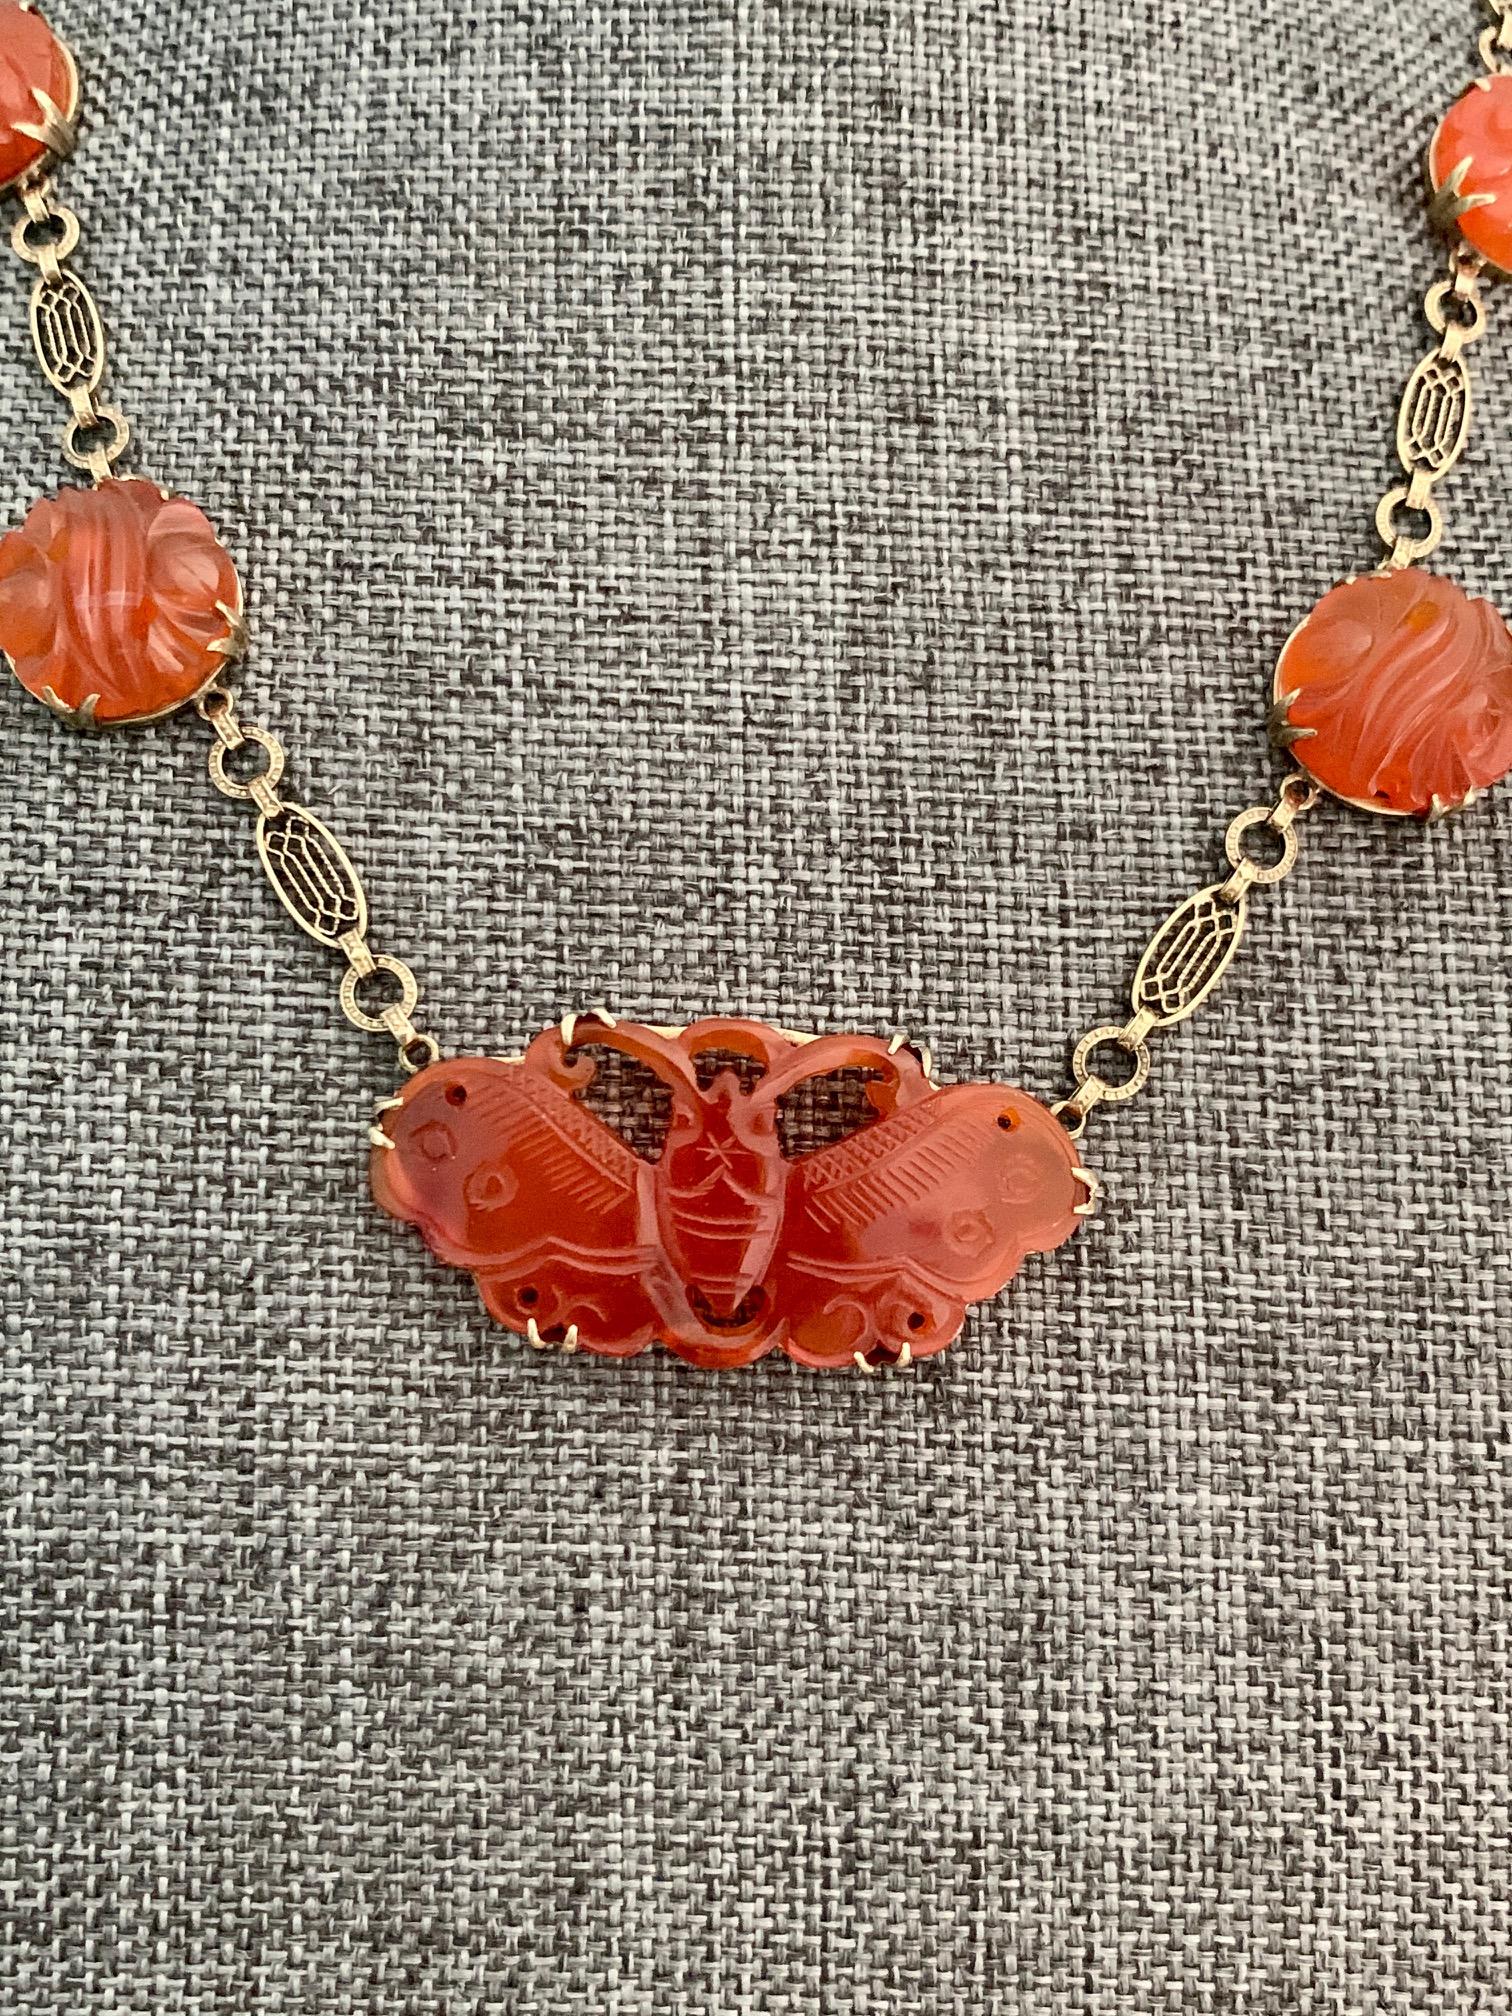 This beautiful necklace features seven carved Carnelian stones; six round stones and one beautifully carved into a butterfly.  The filigree 17